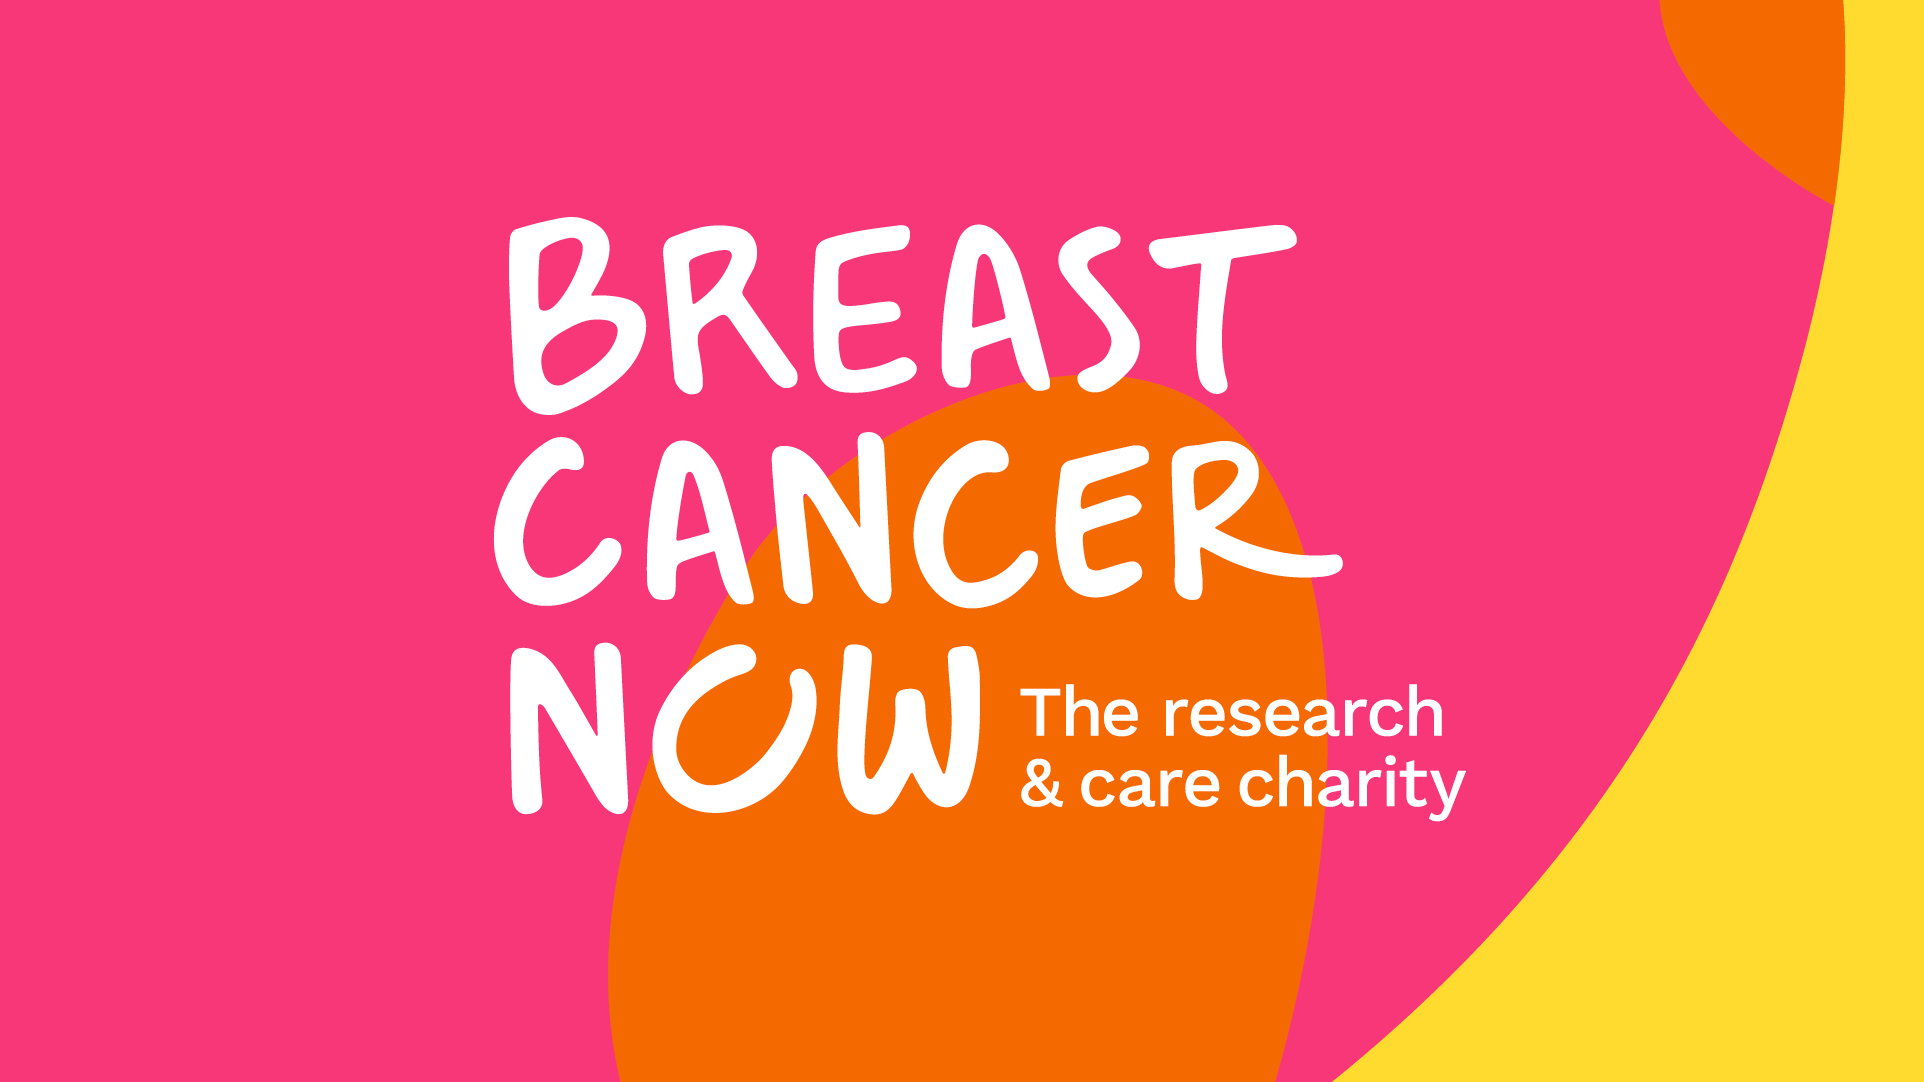 New Logo and Identity for Breast Cancer Now by Wolff Olins